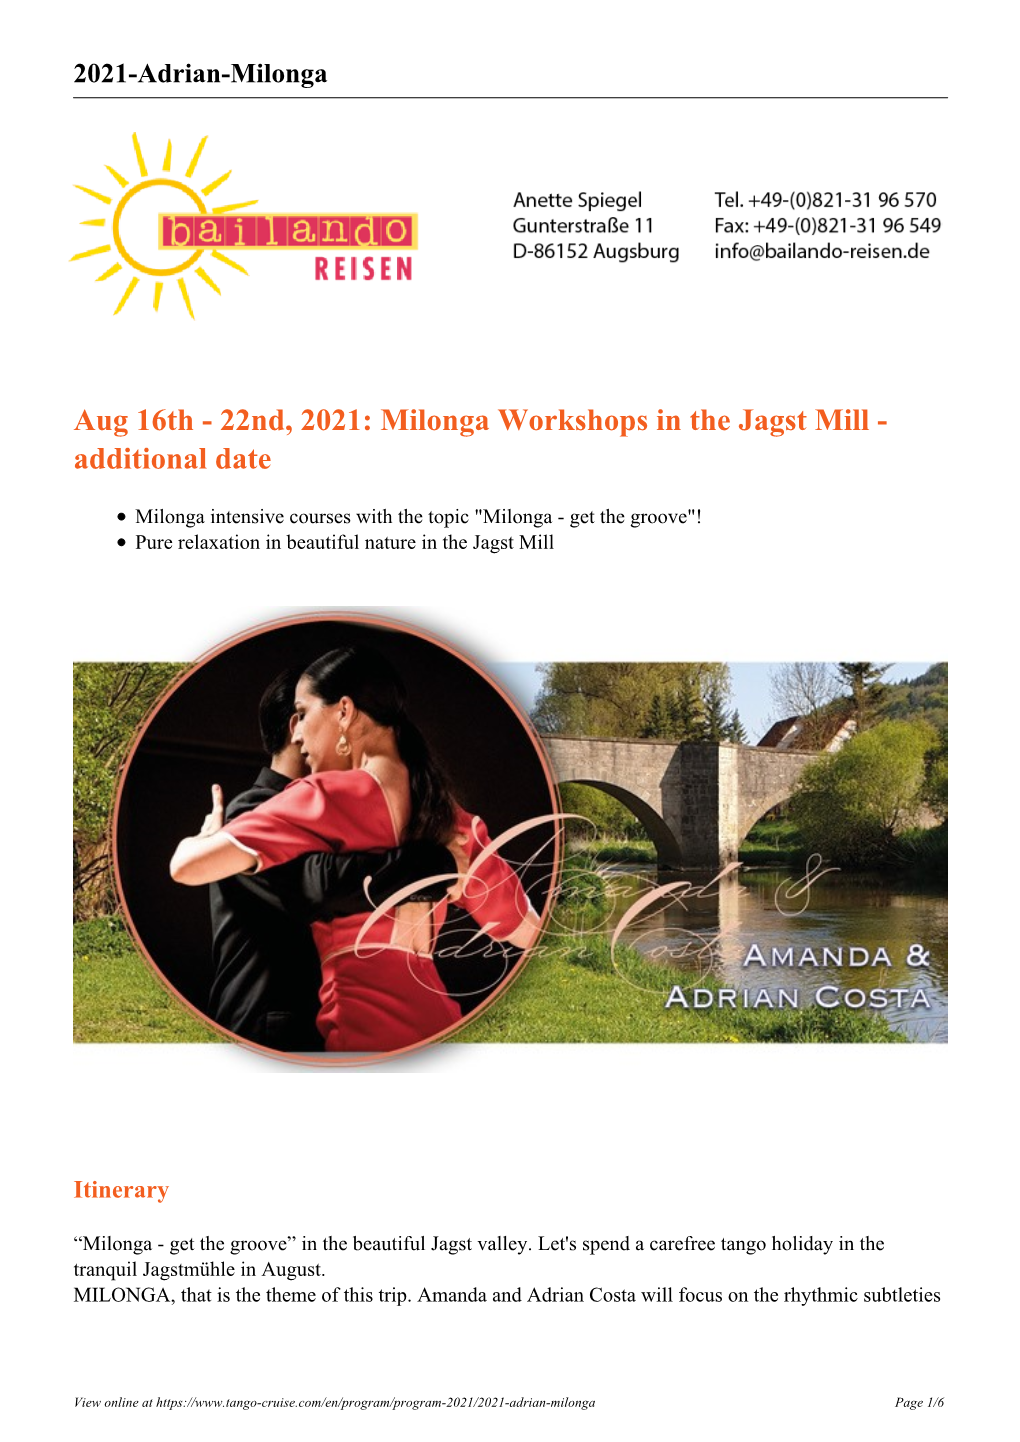 Milonga Workshops in the Jagst Mill - Additional Date